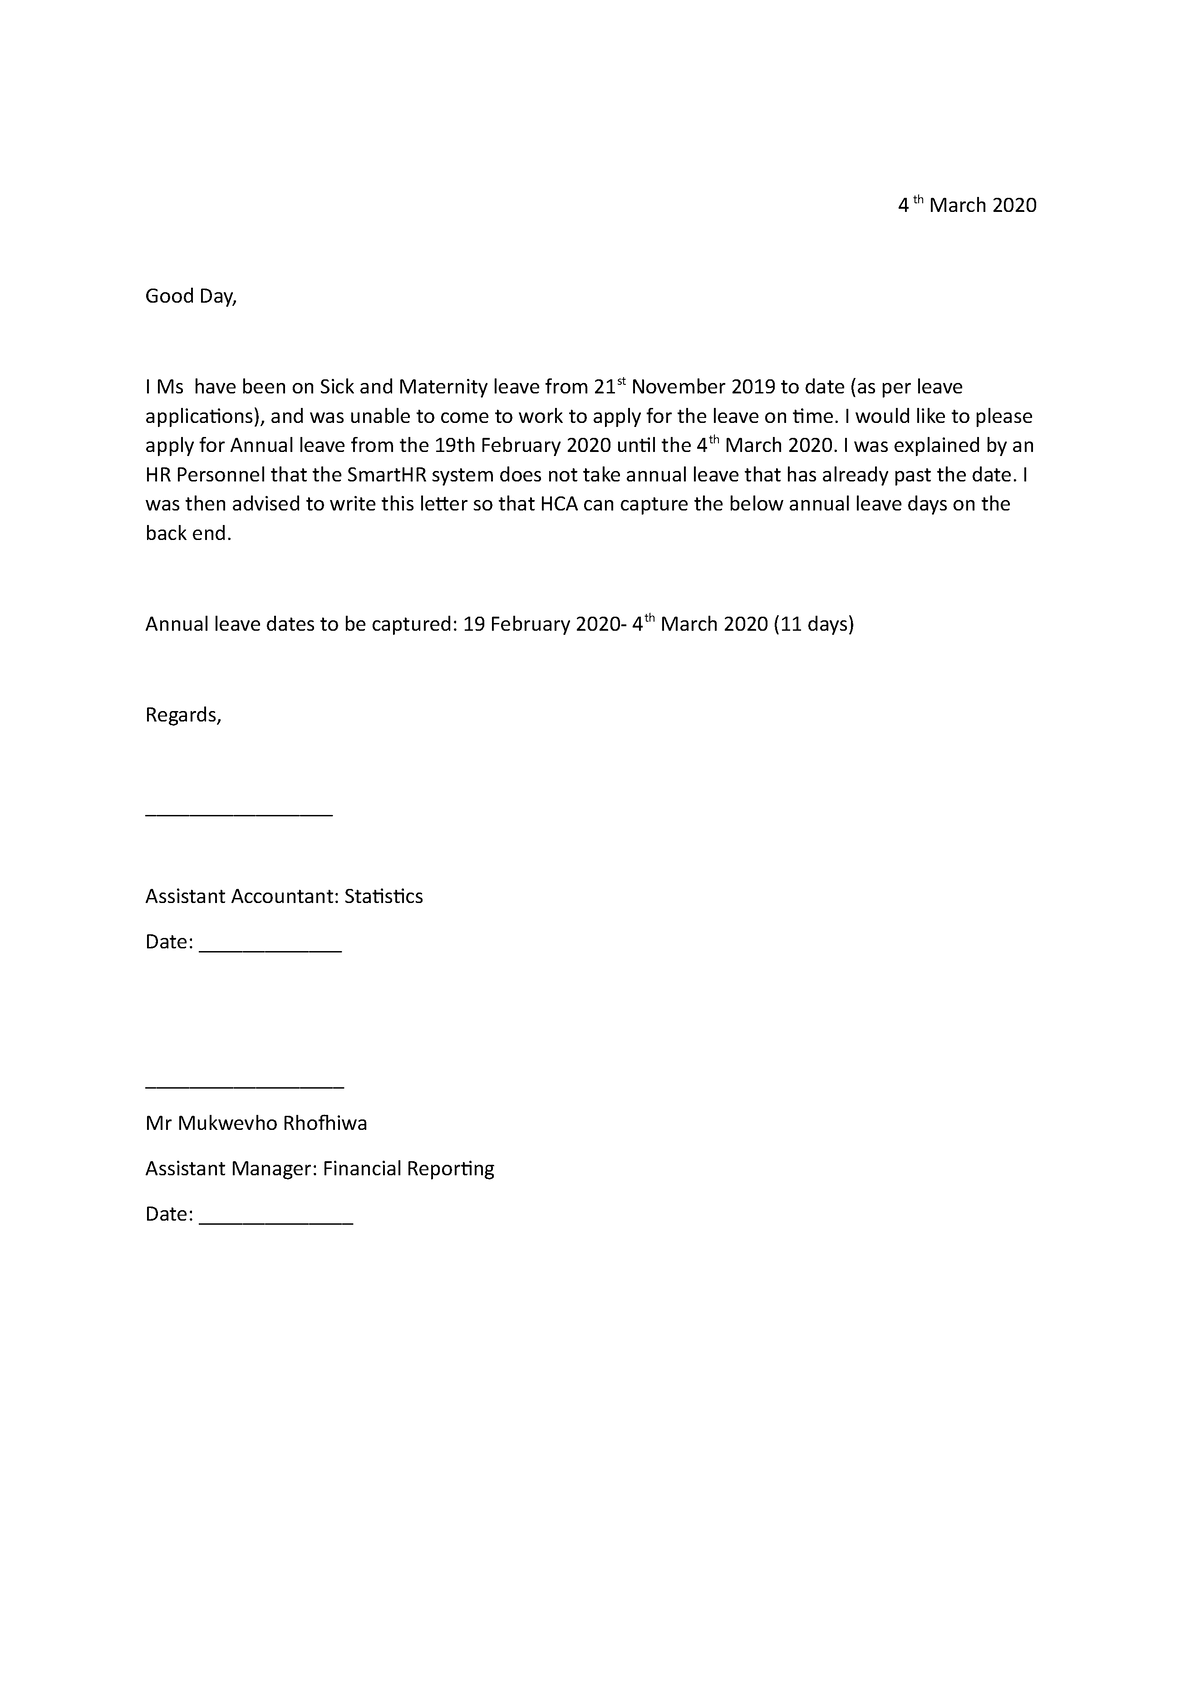 Annual and maternity letter - 4 th March 2020 Good Day, I Ms have been ...